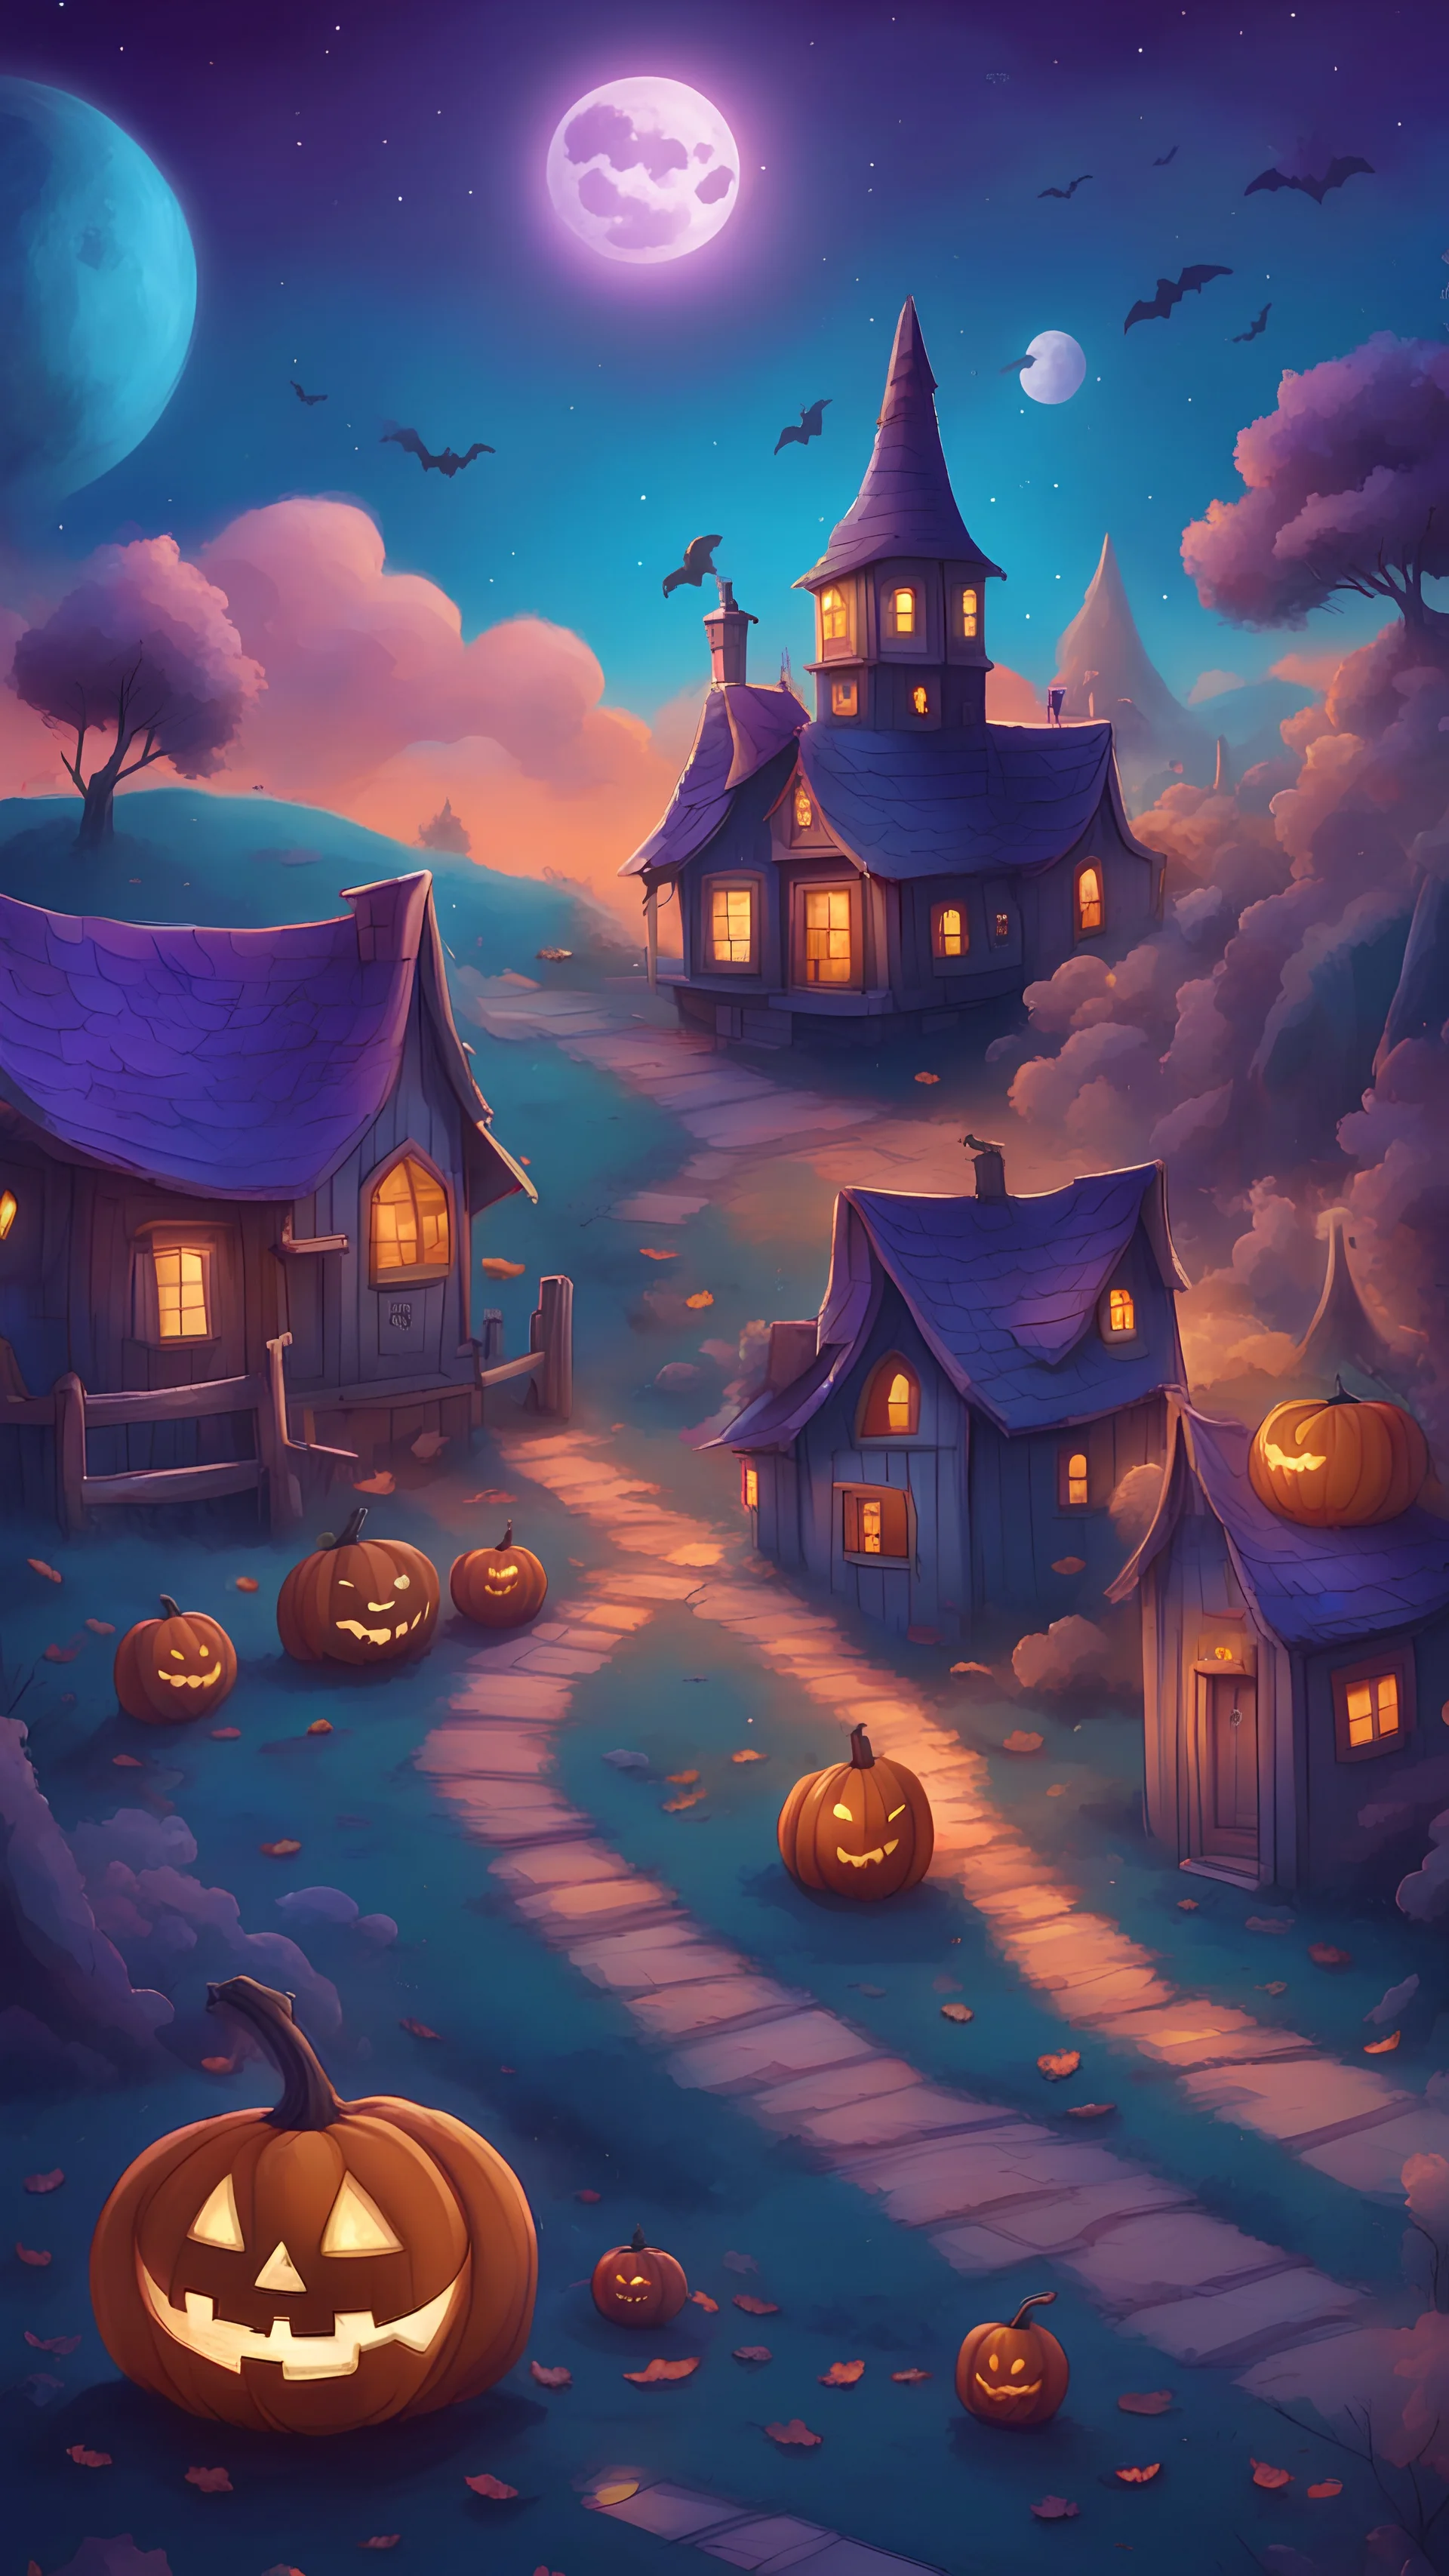 A beautiful village with Halloween decorations and cosmic sky with blue and purple colors